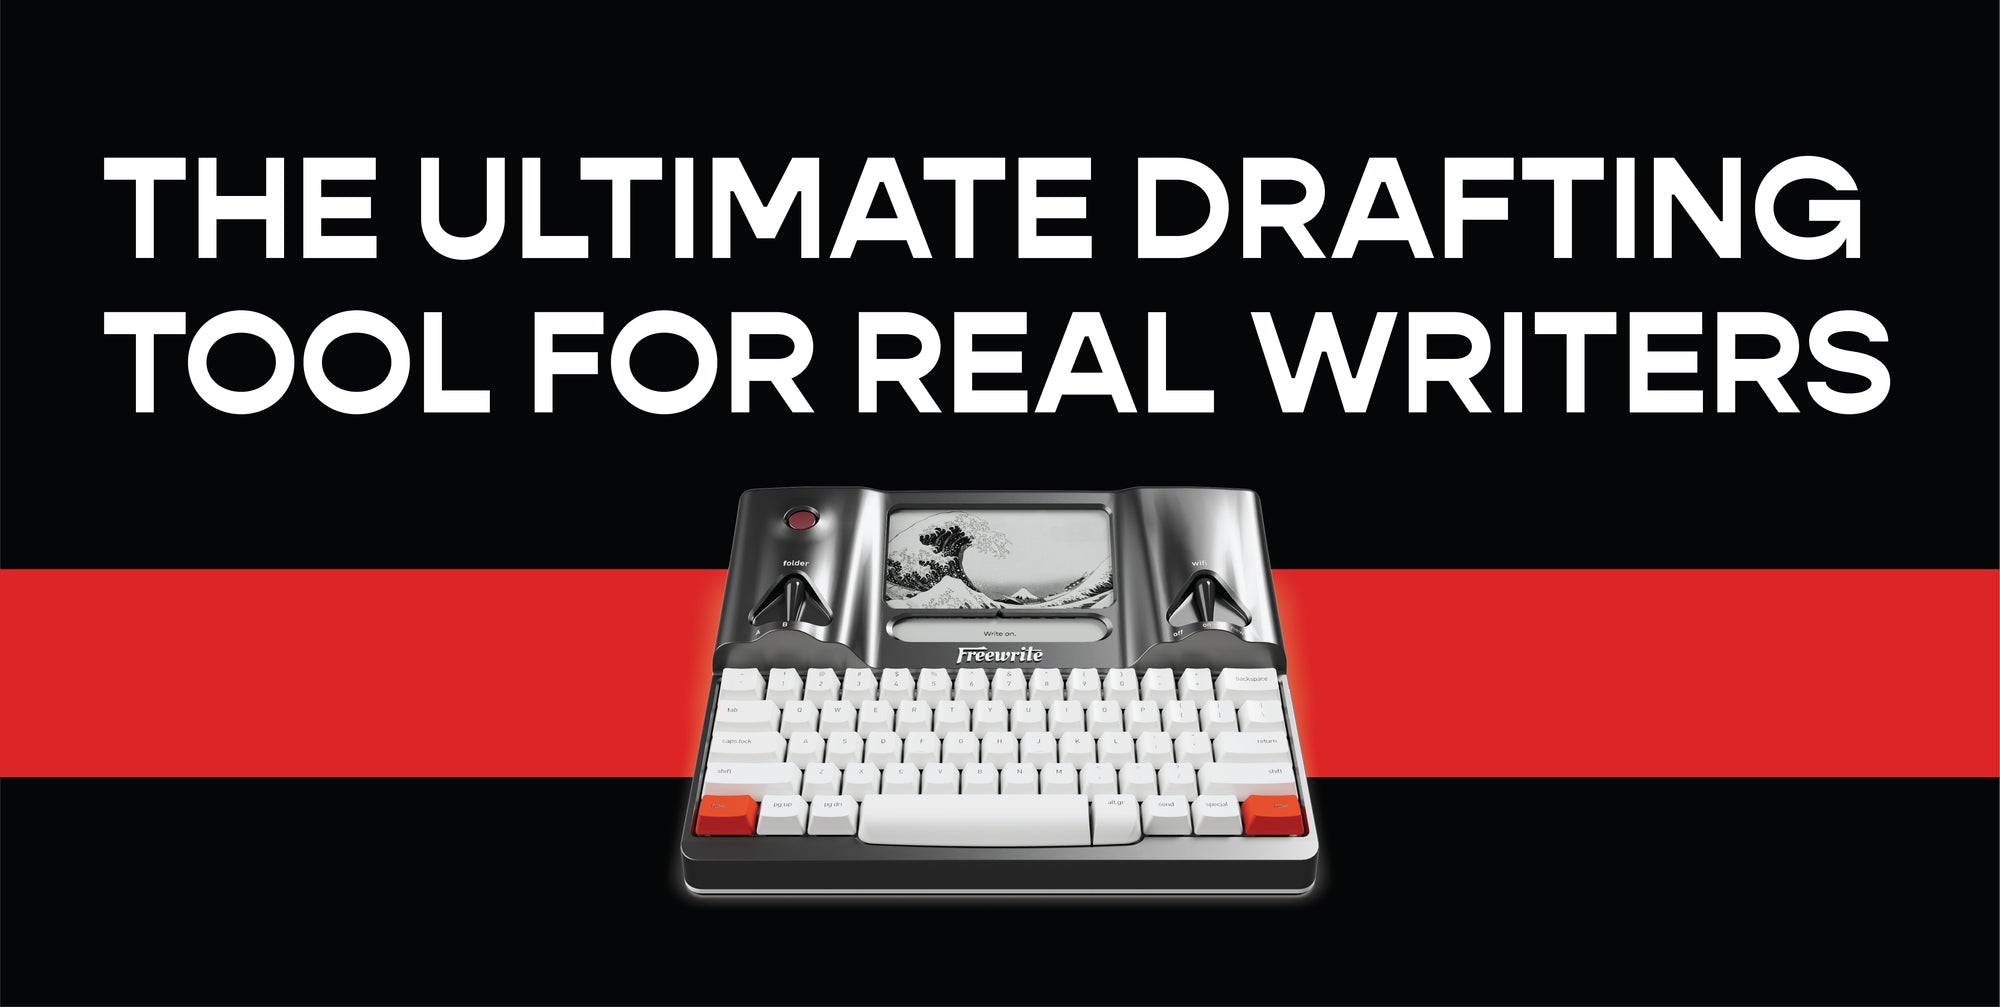 3rd Generation Smart Typewriter - the ultimate drafting tool for real writers